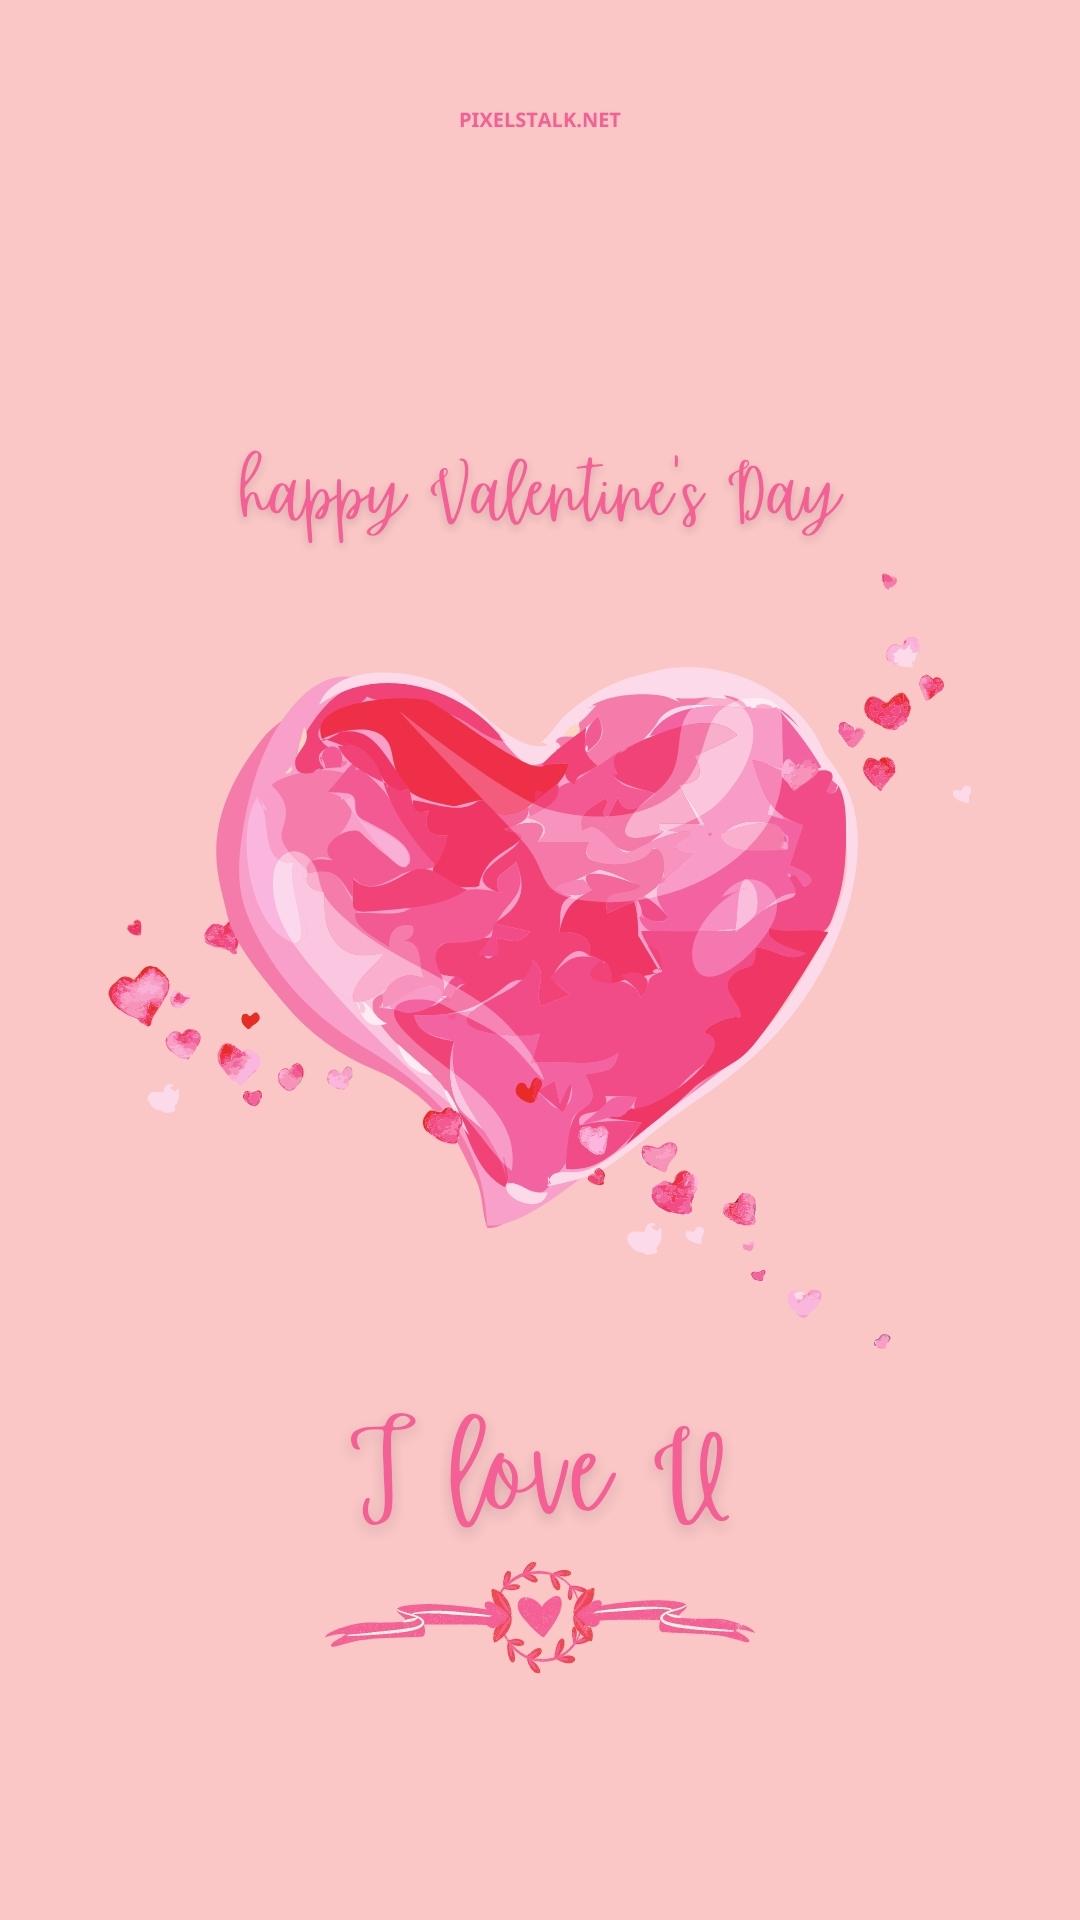 65 Cute Valentine's Day Wallpapers For iPhone (Free Download!)  Valentines  wallpaper, Valentines wallpaper iphone, Holiday iphone wallpaper